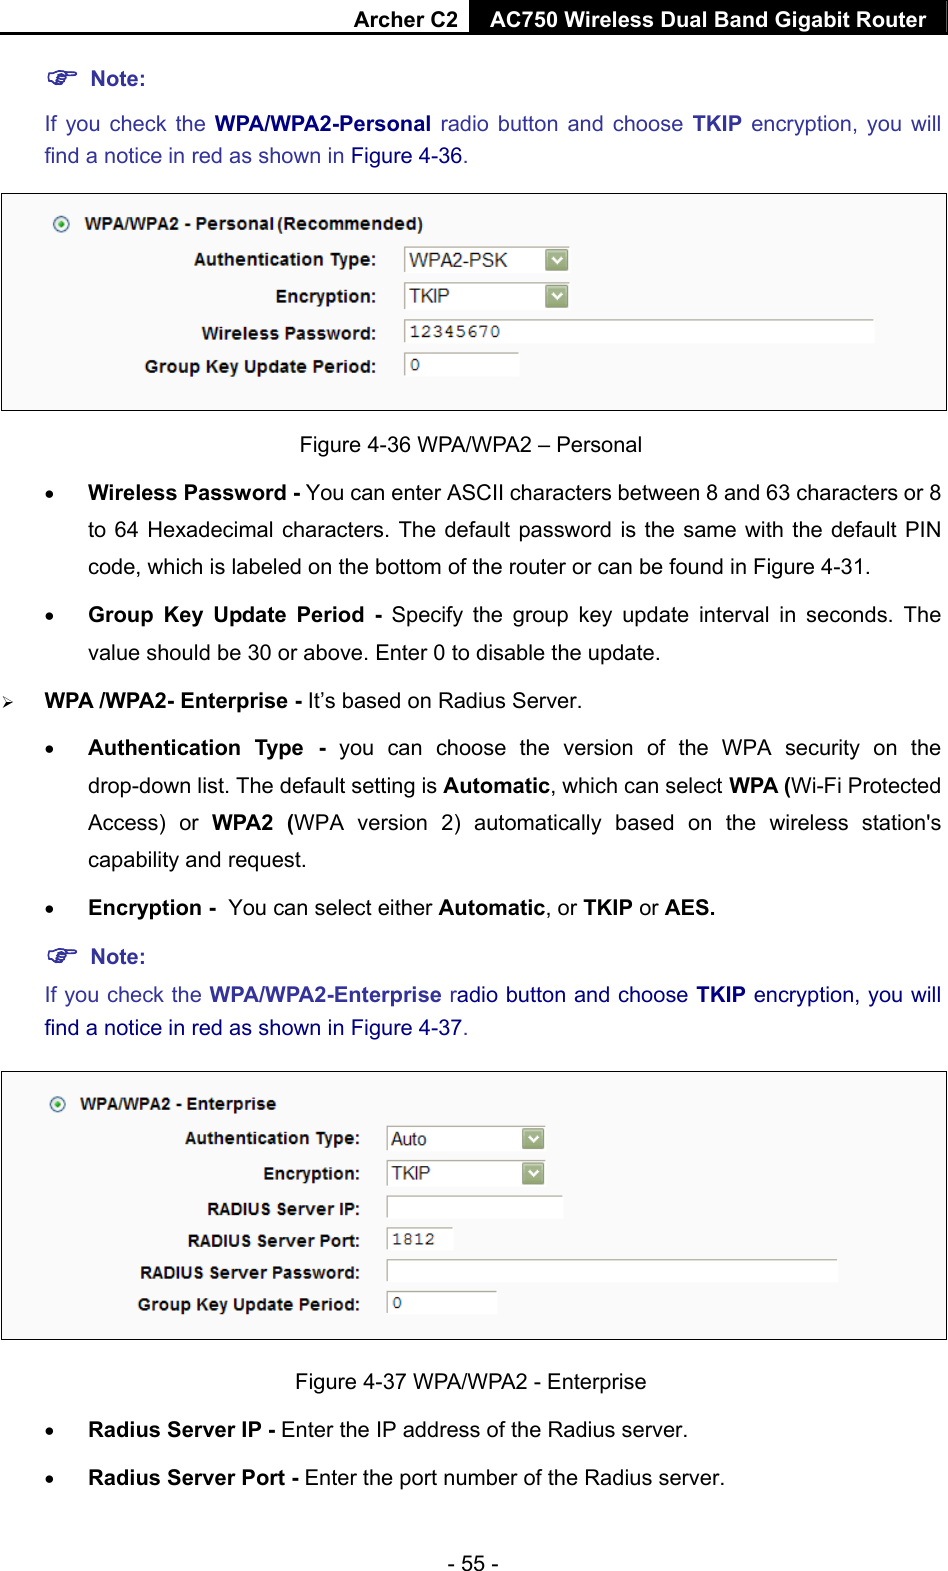 Archer C2 AC750 Wireless Dual Band Gigabit Router  - 55 -  Note:  If you check the WPA/WPA2-Personal radio button and choose TKIP encryption, you will find a notice in red as shown in Figure 4-36.  Figure 4-36 WPA/WPA2 – Personal  Wireless Password - You can enter ASCII characters between 8 and 63 characters or 8 to 64 Hexadecimal characters. The default password is the same with the default PIN code, which is labeled on the bottom of the router or can be found in Figure 4-31.  Group Key Update Period - Specify the group key update interval in seconds. The value should be 30 or above. Enter 0 to disable the update.  WPA /WPA2- Enterprise - It’s based on Radius Server.  Authentication Type - you can choose the version of the WPA security on the drop-down list. The default setting is Automatic, which can select WPA (Wi-Fi Protected Access) or WPA2 (WPA version 2) automatically based on the wireless station&apos;s capability and request.  Encryption - You can select either Automatic, or TKIP or AES.  Note: If you check the WPA/WPA2-Enterprise radio button and choose TKIP encryption, you will find a notice in red as shown in Figure 4-37.  Figure 4-37 WPA/WPA2 - Enterprise  Radius Server IP - Enter the IP address of the Radius server.  Radius Server Port - Enter the port number of the Radius server. 